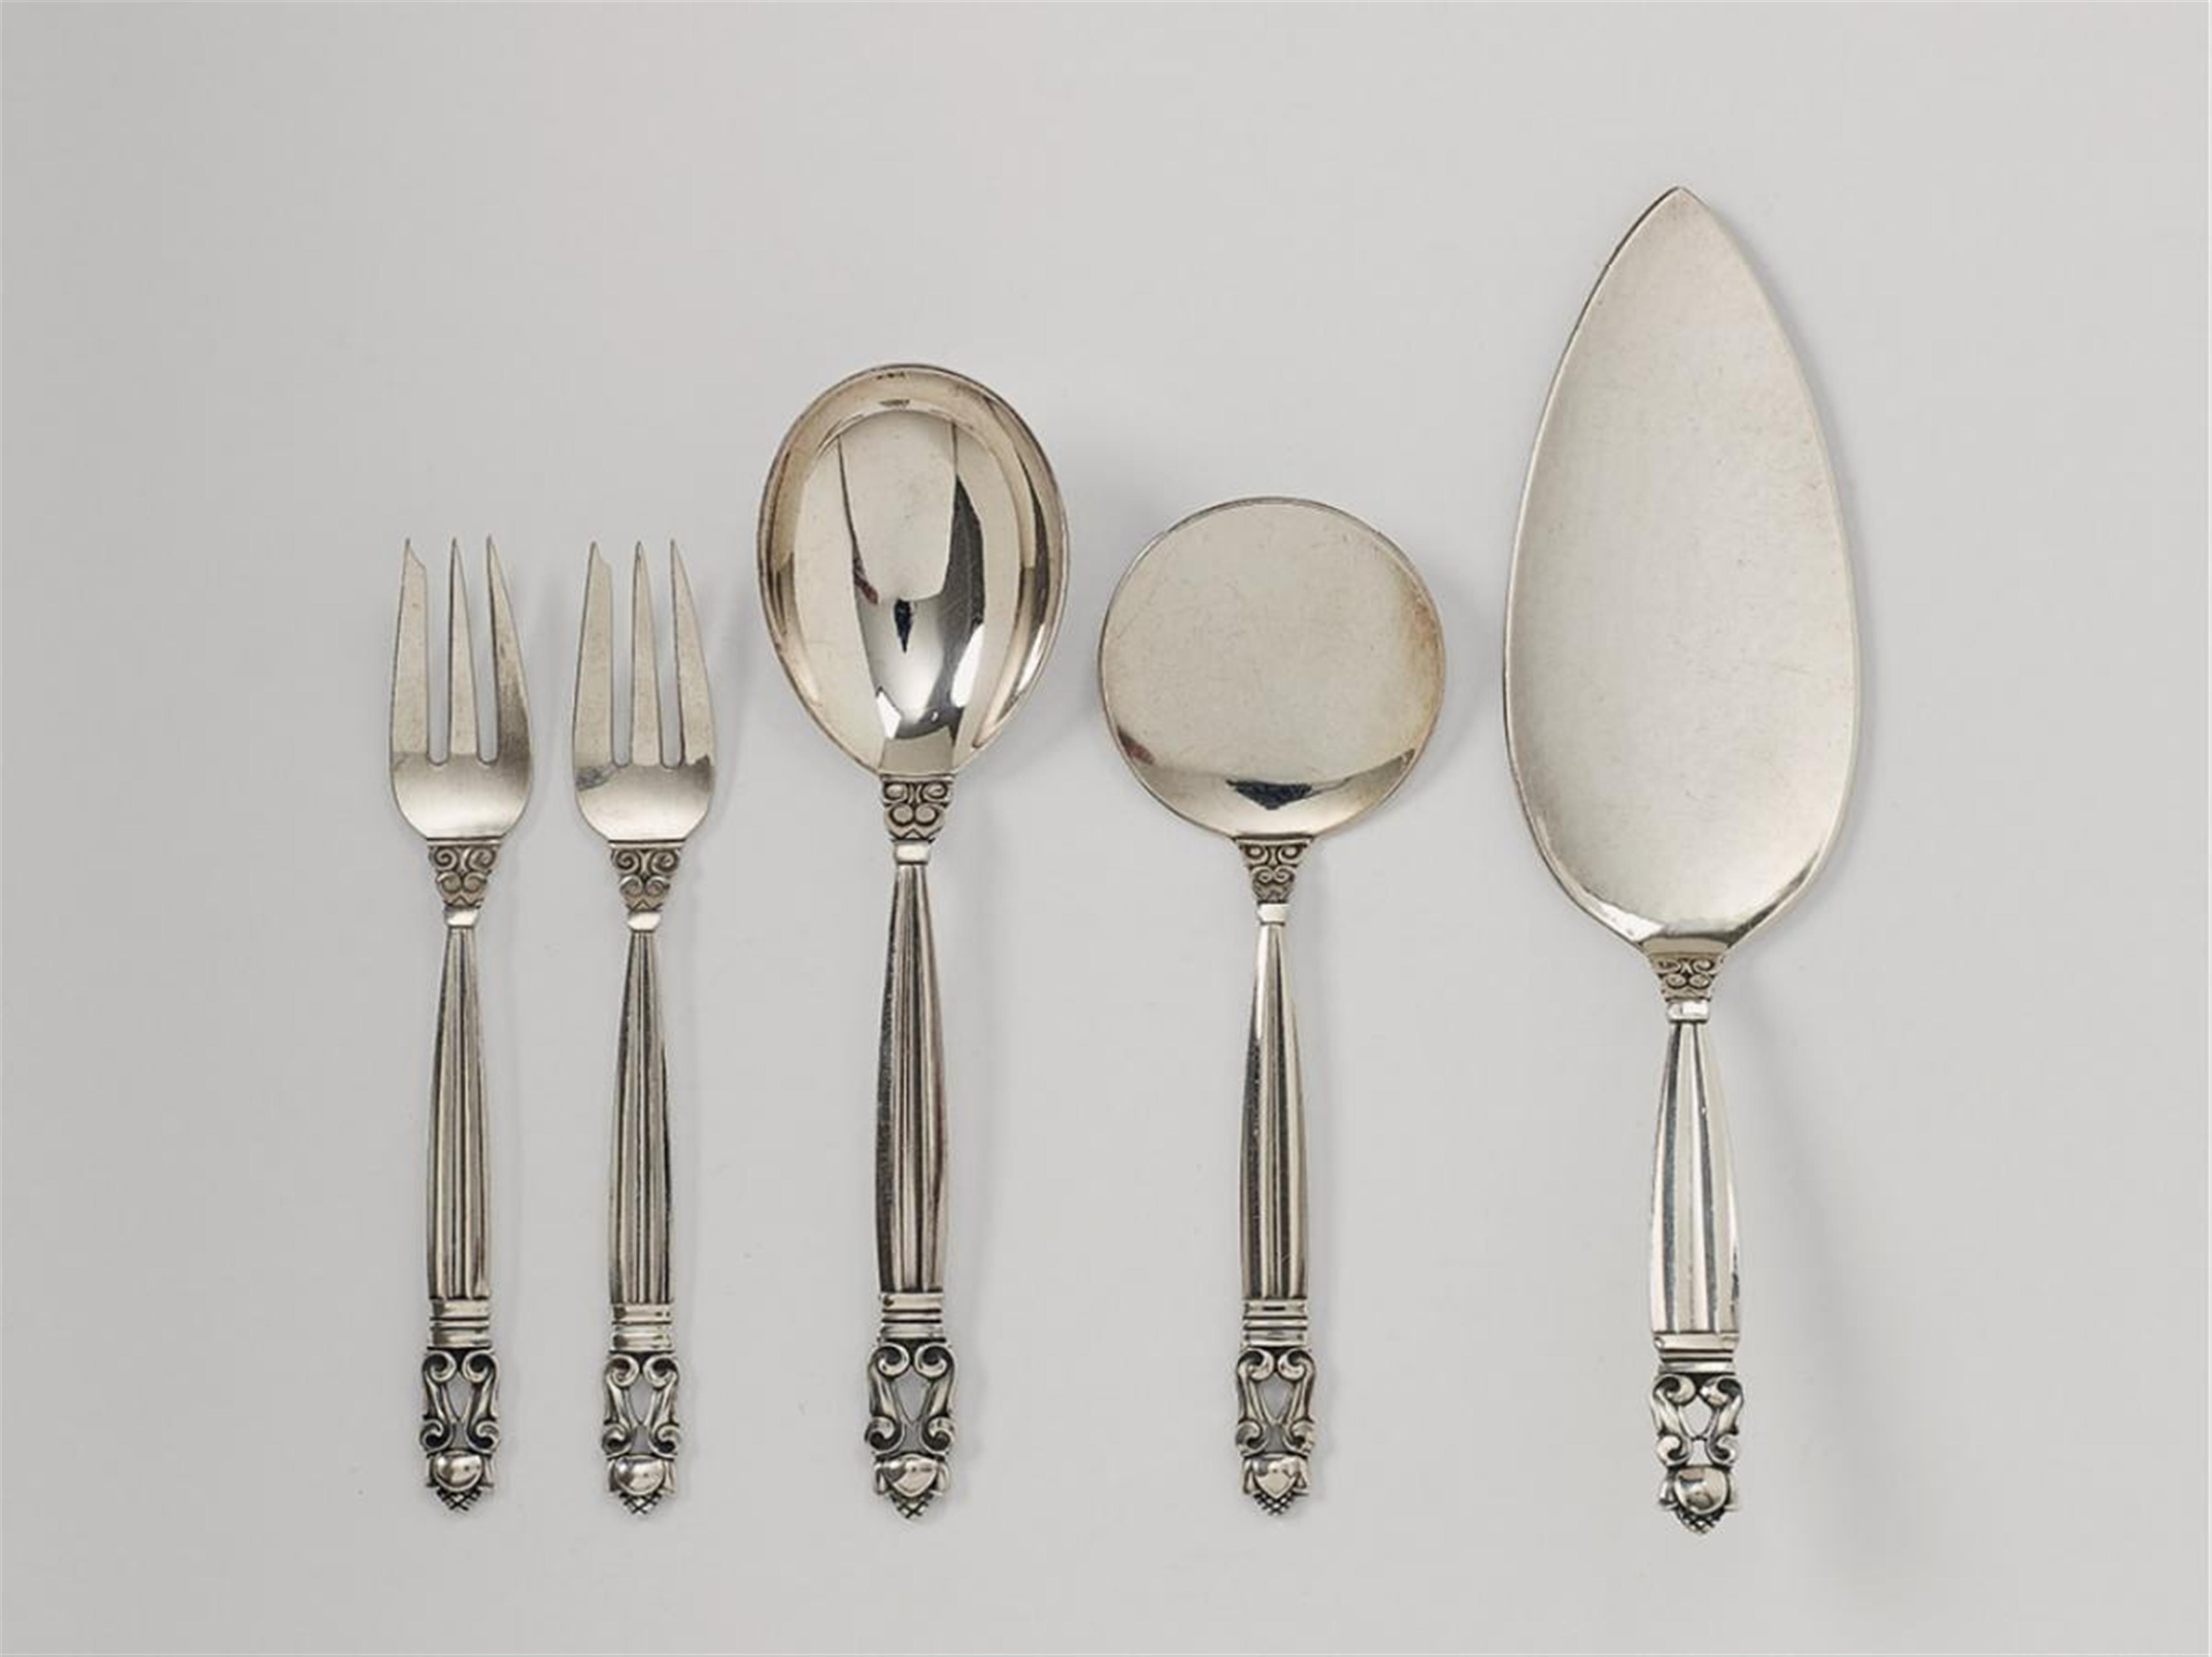 Copenhagen silver cutlery set no. 62. Comprising 12 cake forks, 12 coffee spoons, a sugar spoon and two slices. Design Johan Rohde 1915, made by Georg Jensen after 1945. - image-1